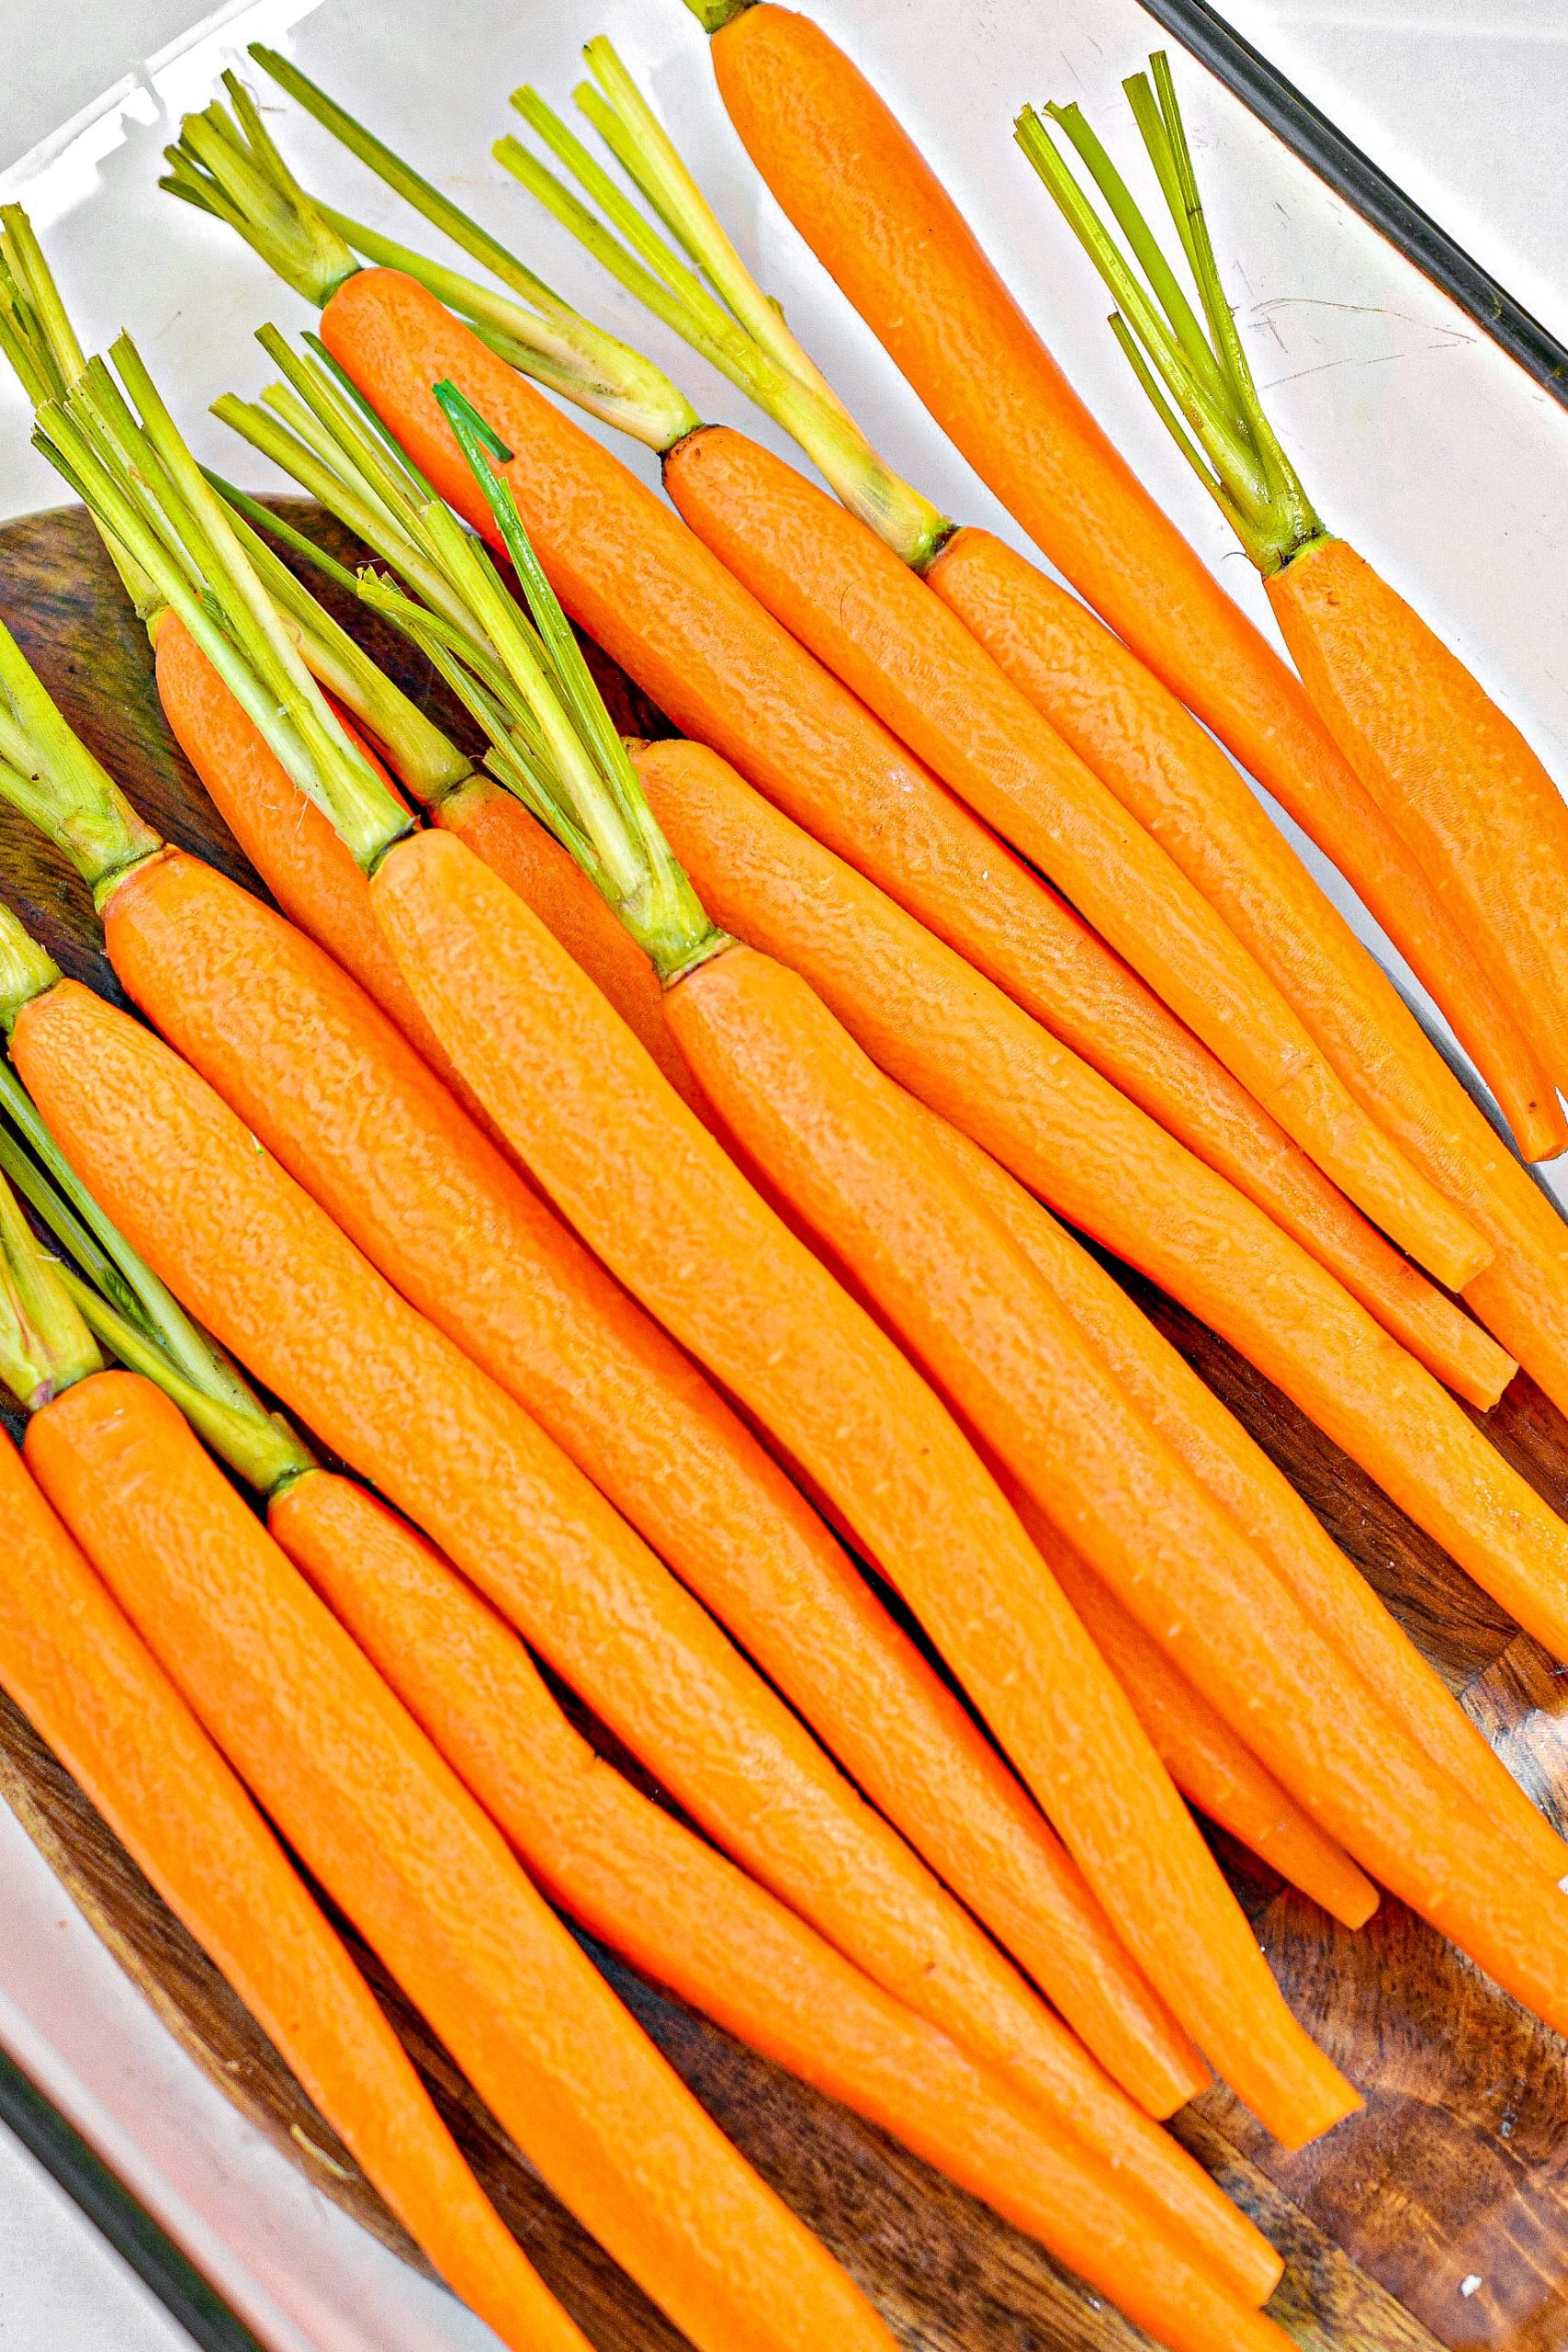 Place the carrots that have been peeled and have had their tops trimmed into a well-greased 9x13 baking dish.